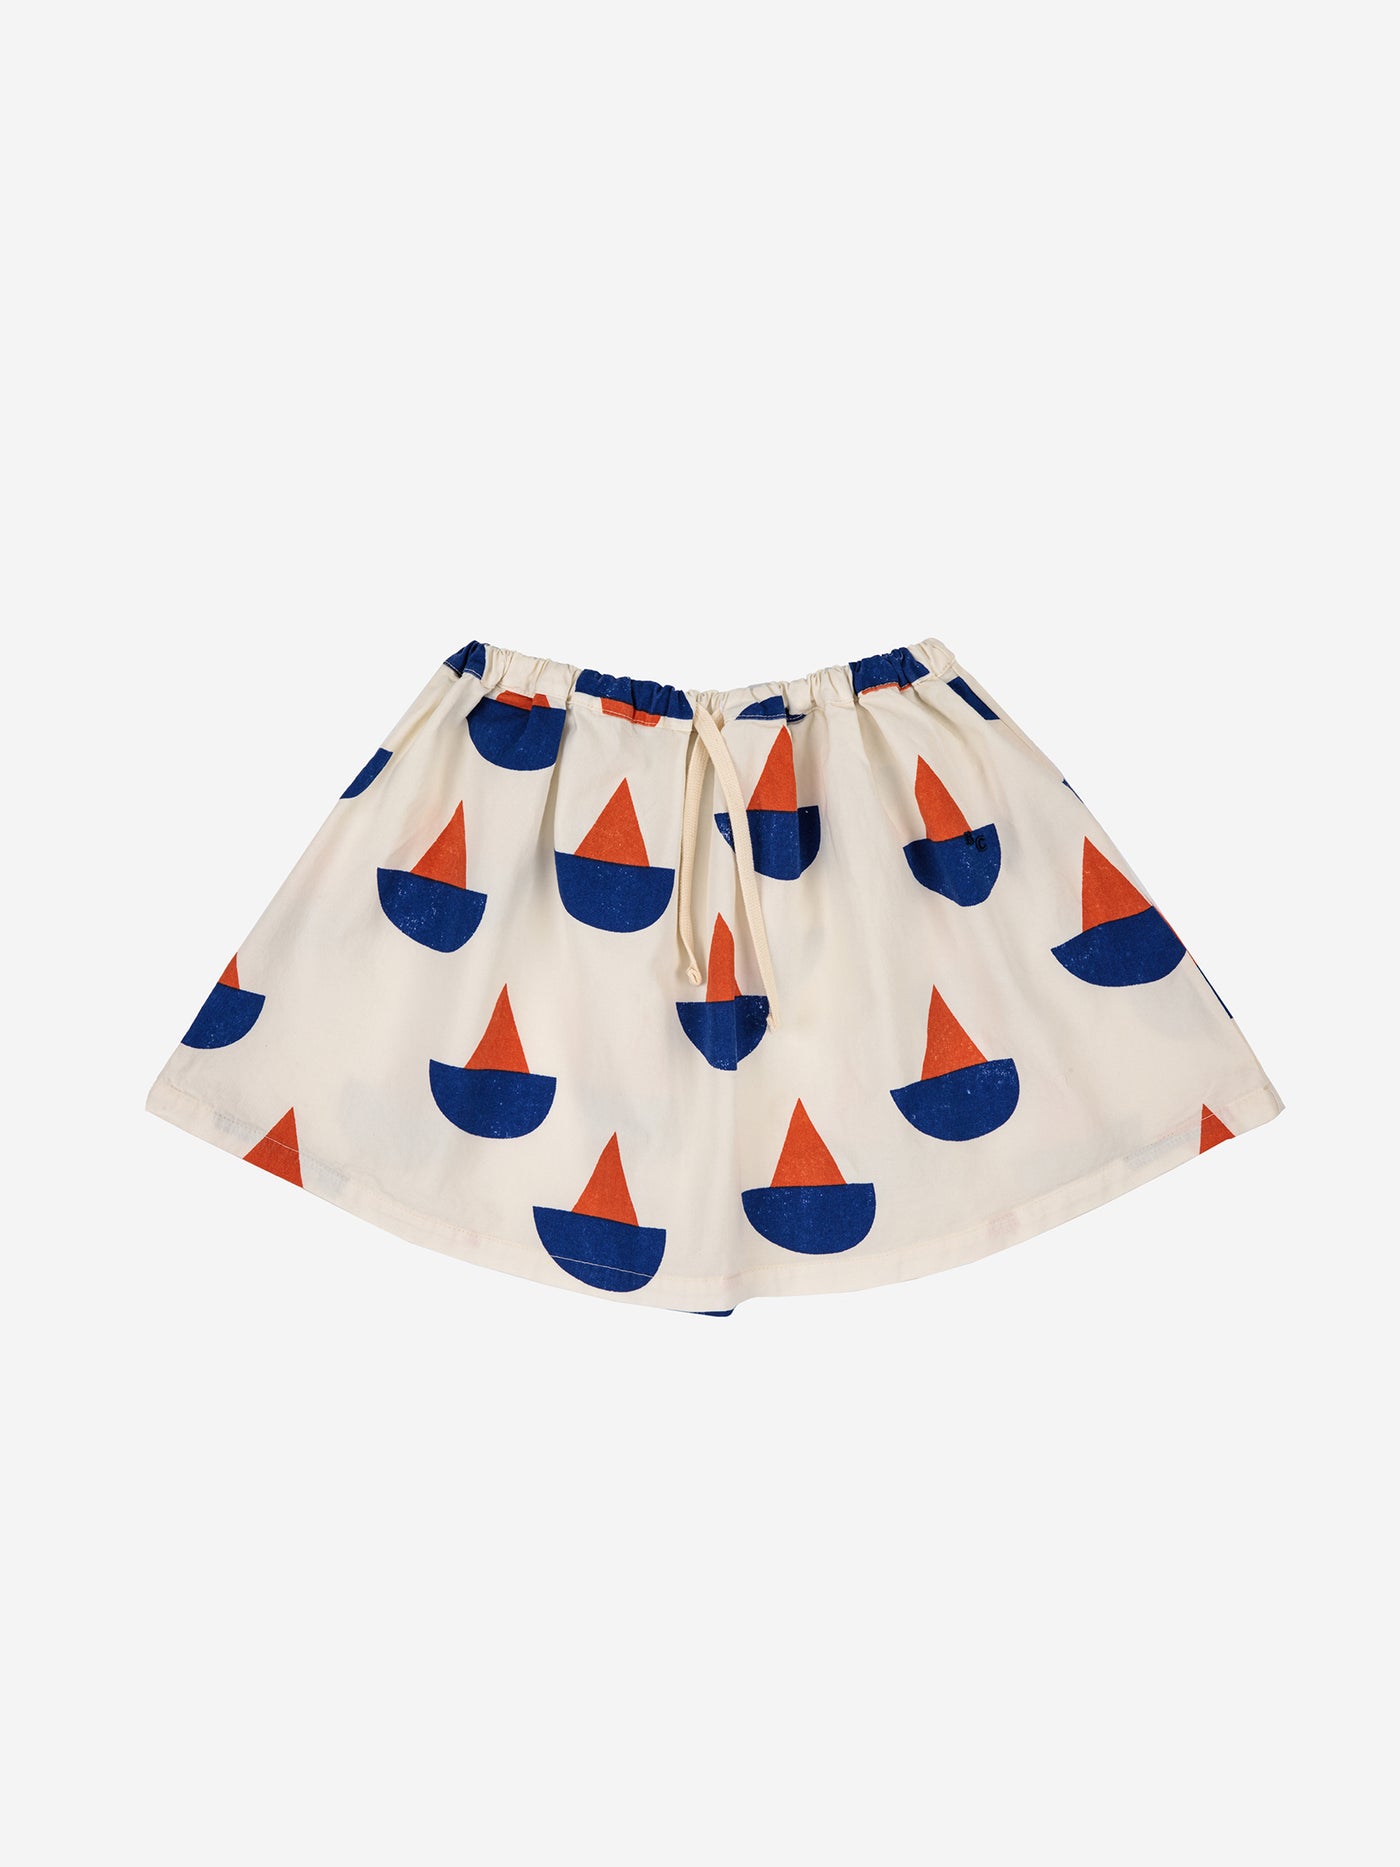 Sail Boat All Over Woven Skirt